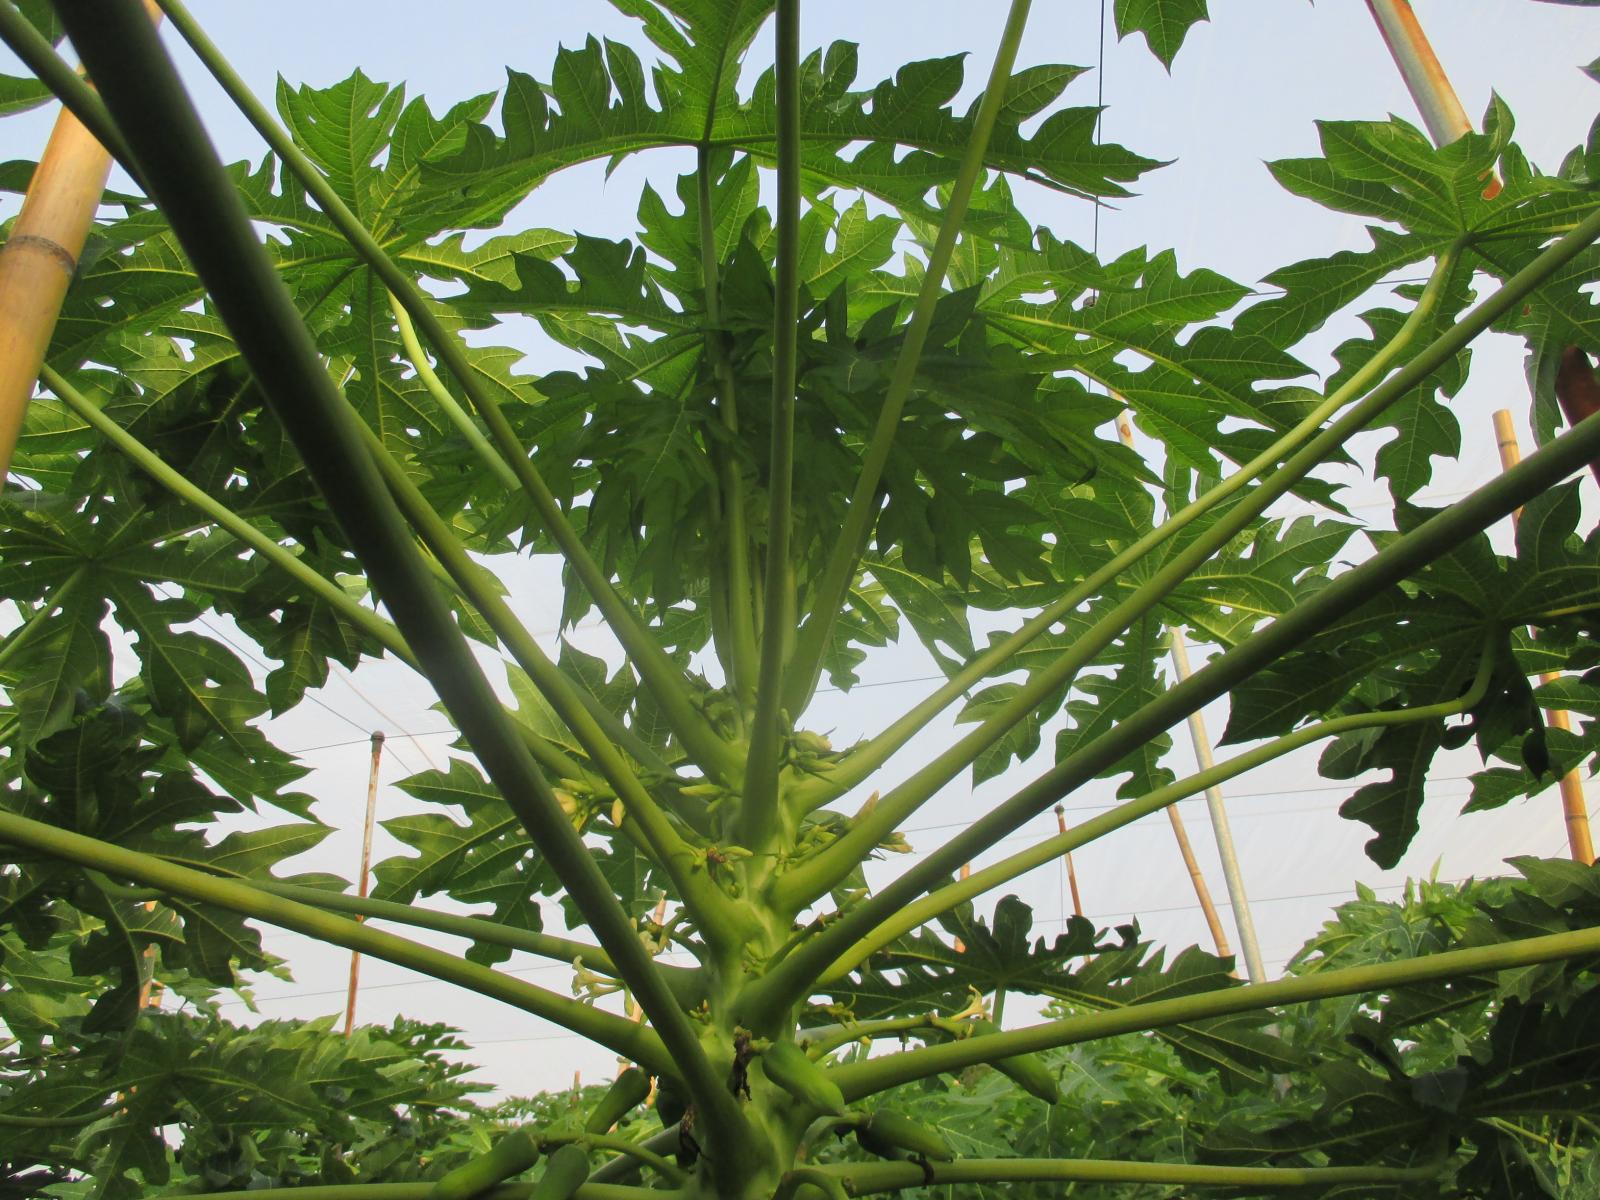 The S1 single plant of all hermaphrodite line is tolerant of papaya ring spot disease. The leaves almost have no disease symptom.